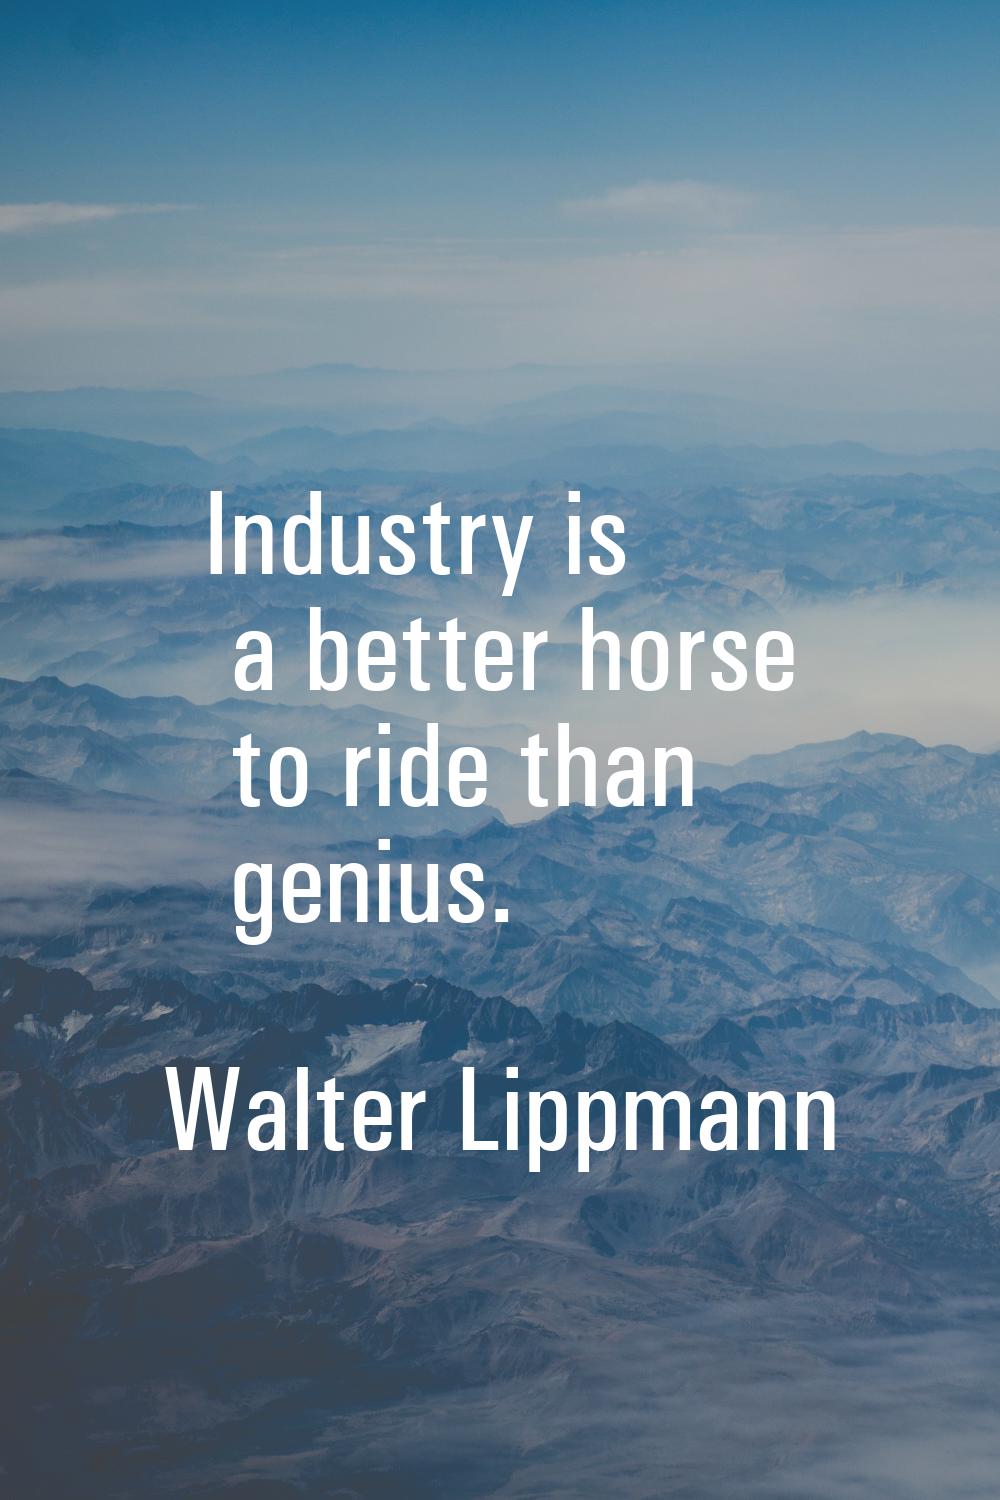 Industry is a better horse to ride than genius.